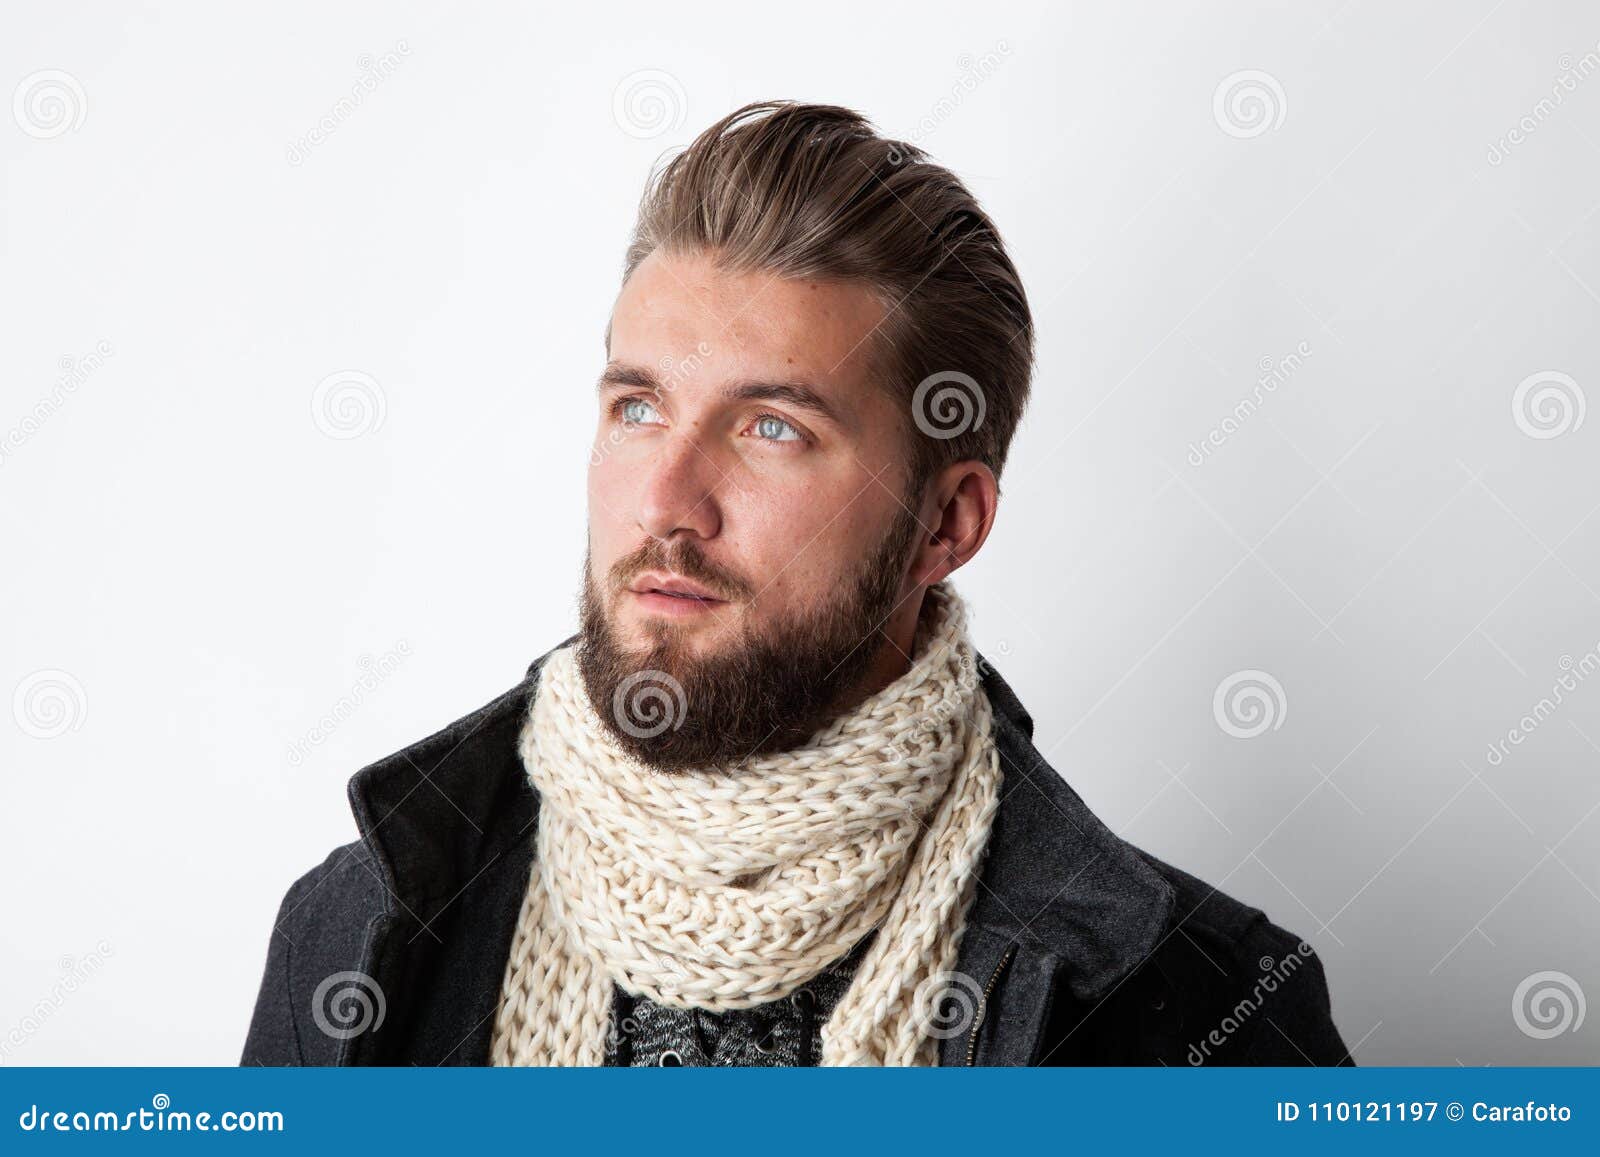 Attractive Man with a Beard and a Scarf Stock Image - Image of fall ...